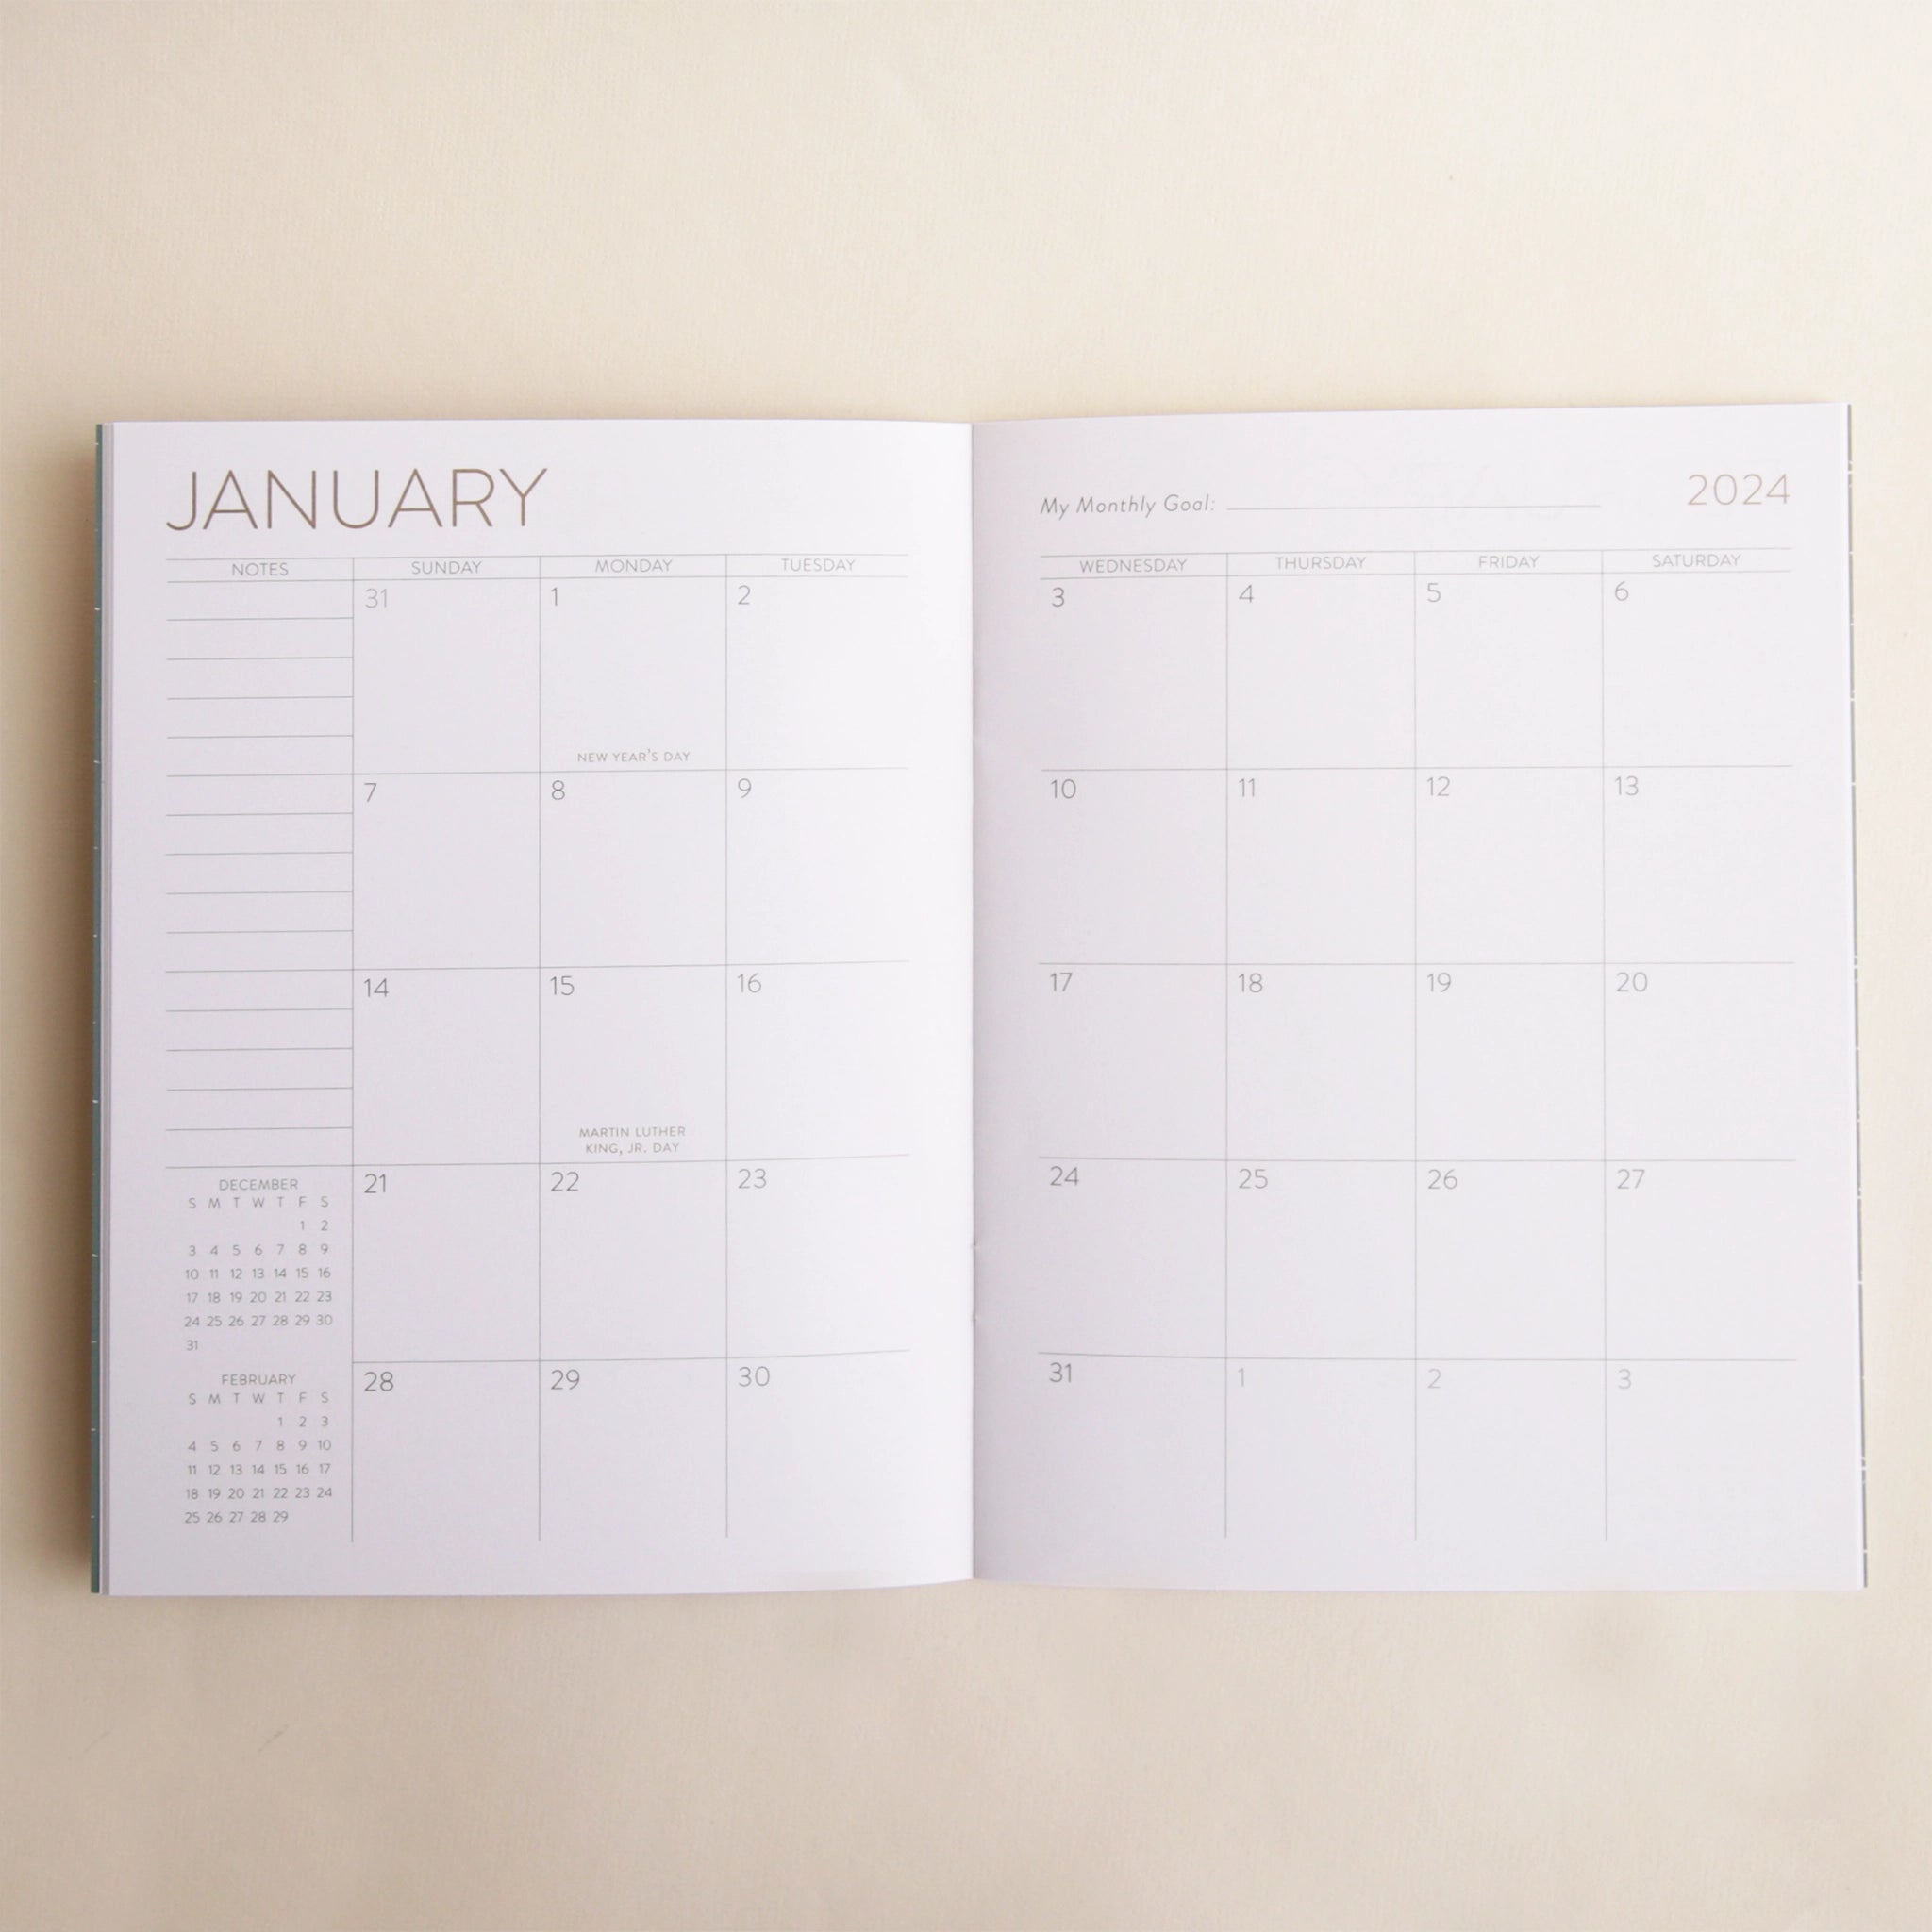 The interior of the planner that features a monthly calendar view. 